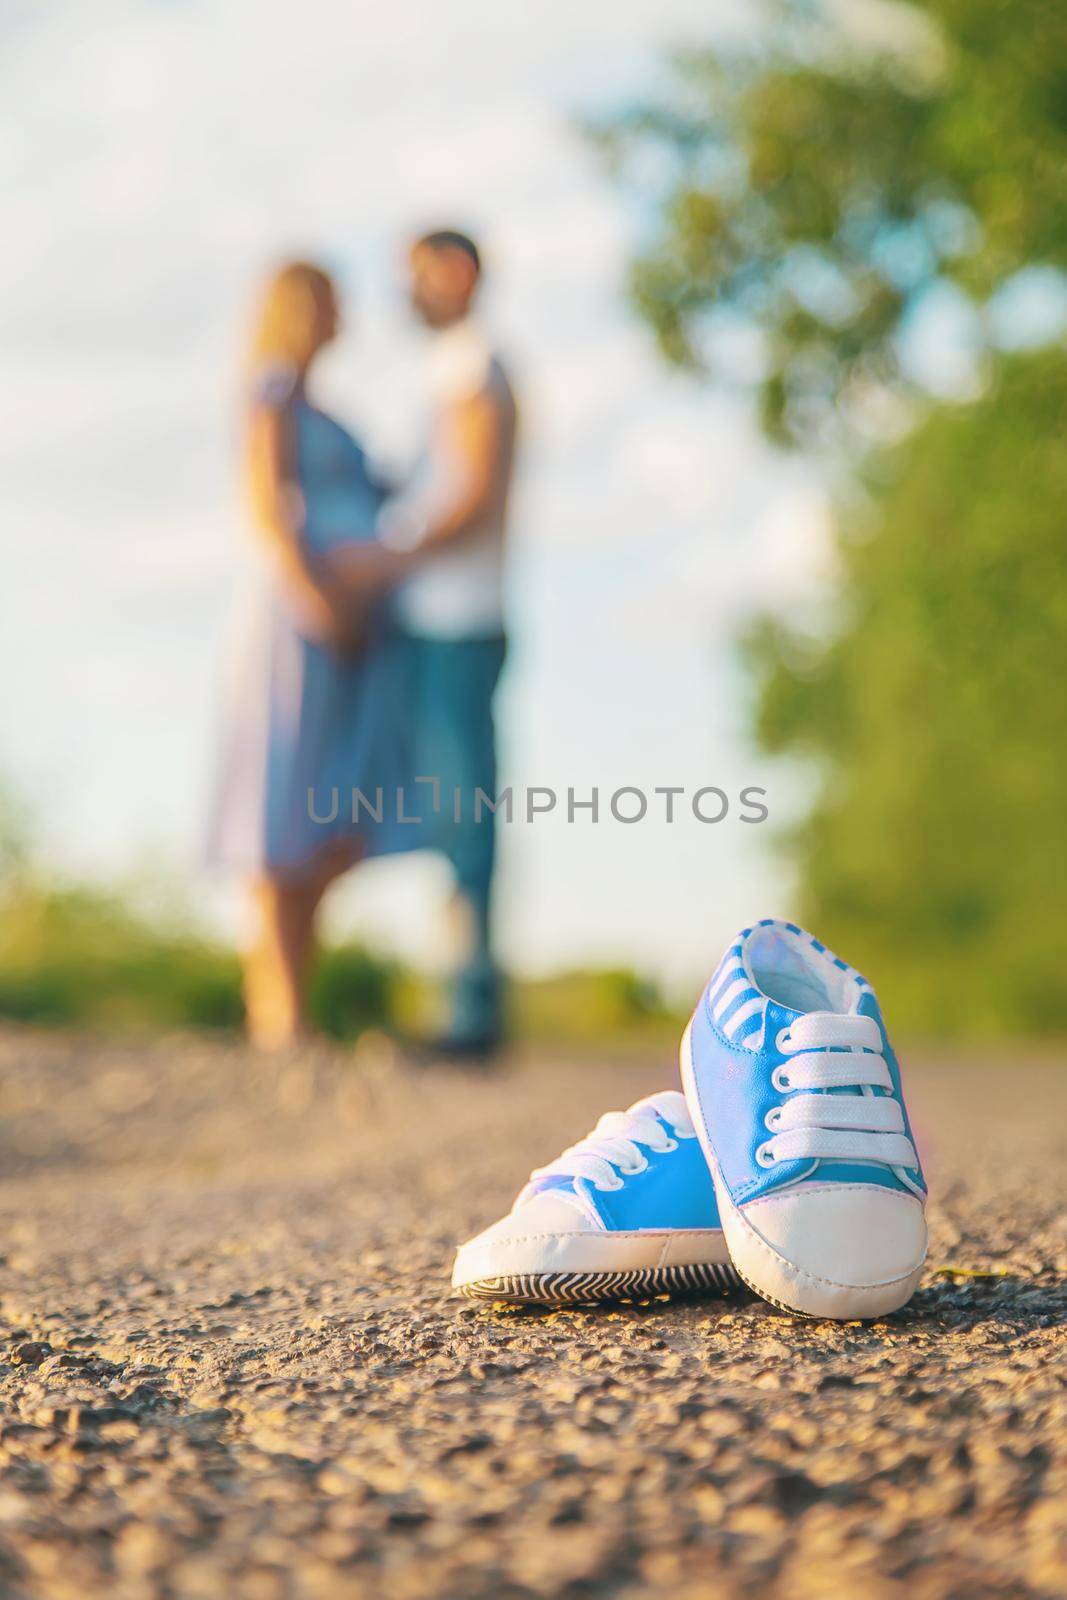 Pregnant woman and man baby shoes. Selective focus. nature.